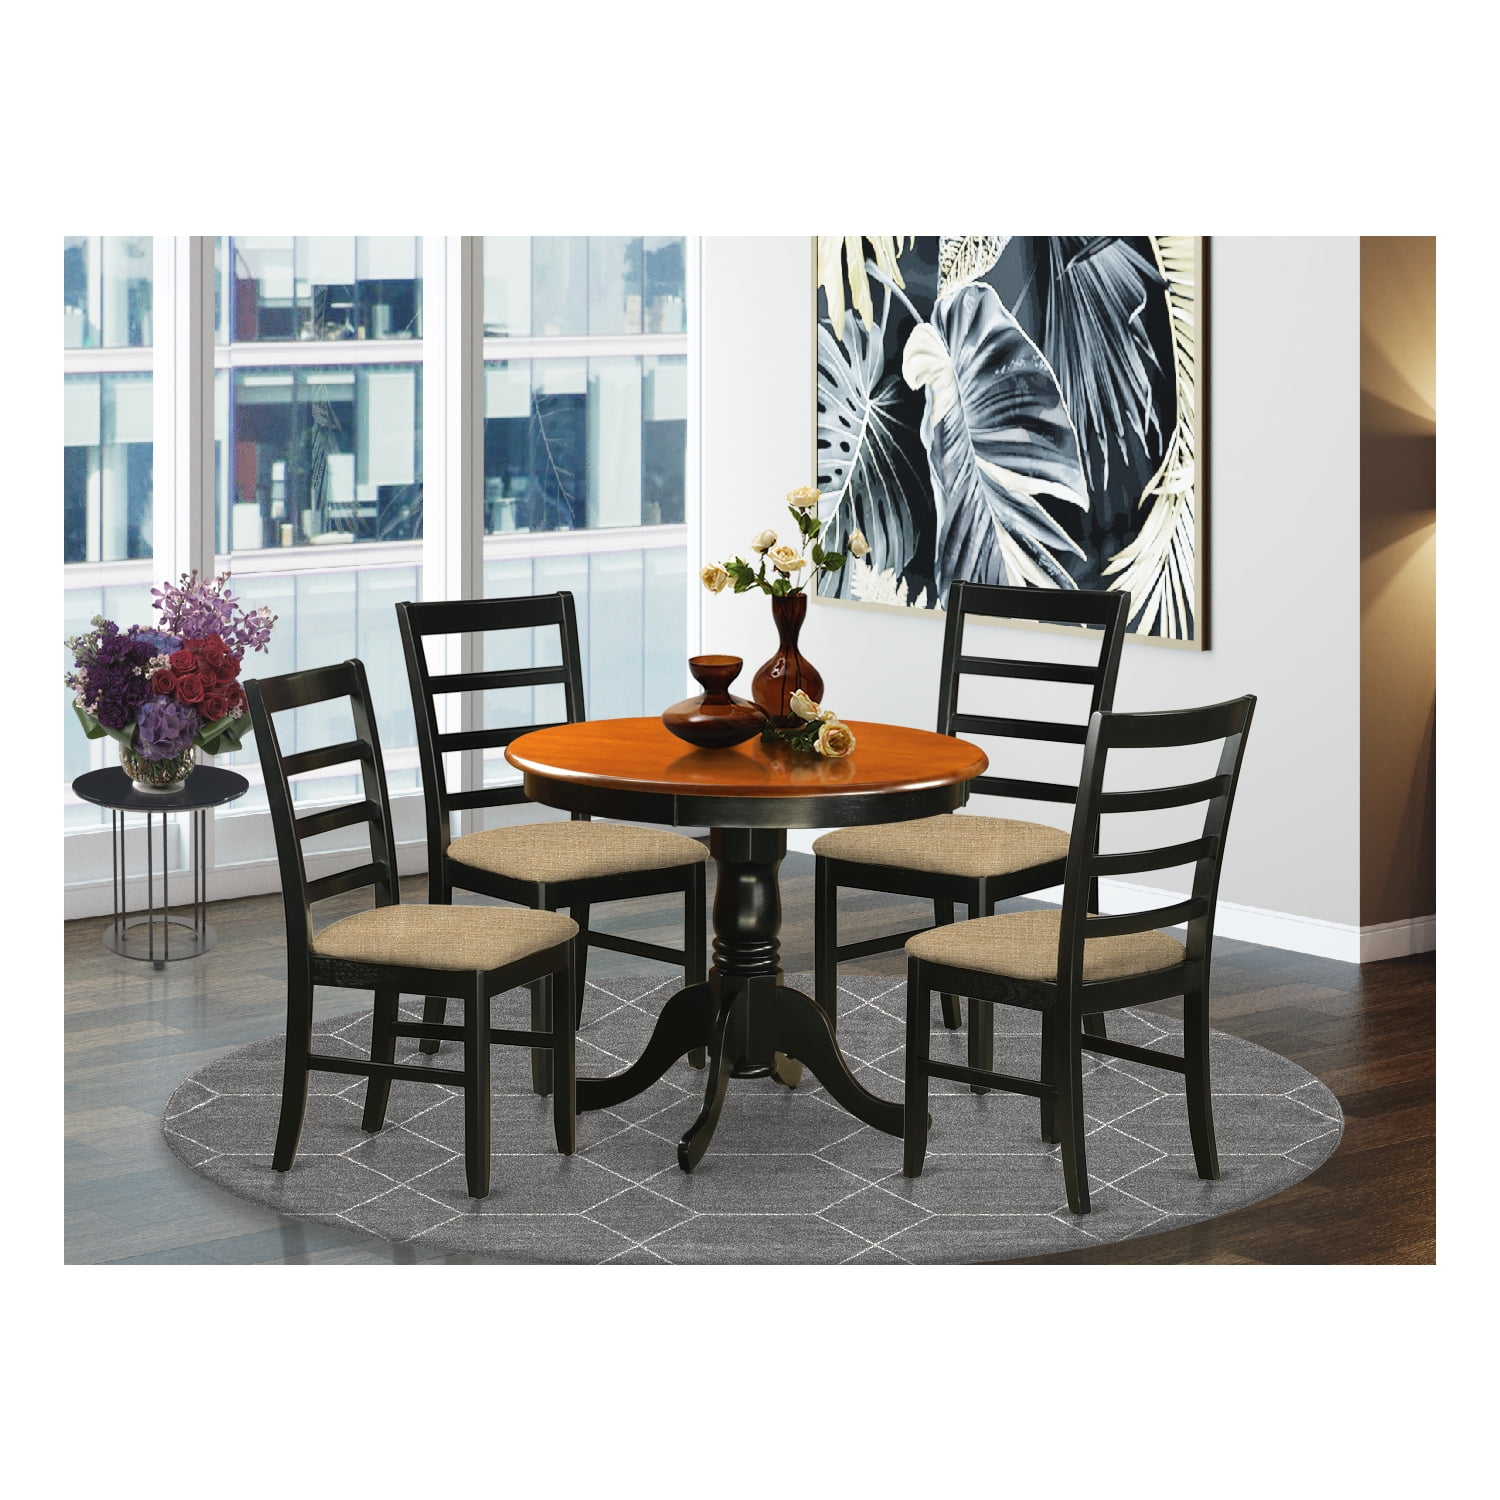 Round Dining Table and 2/4 Chairs Set Plastic Wood Legs Office Bistro Cafe Black